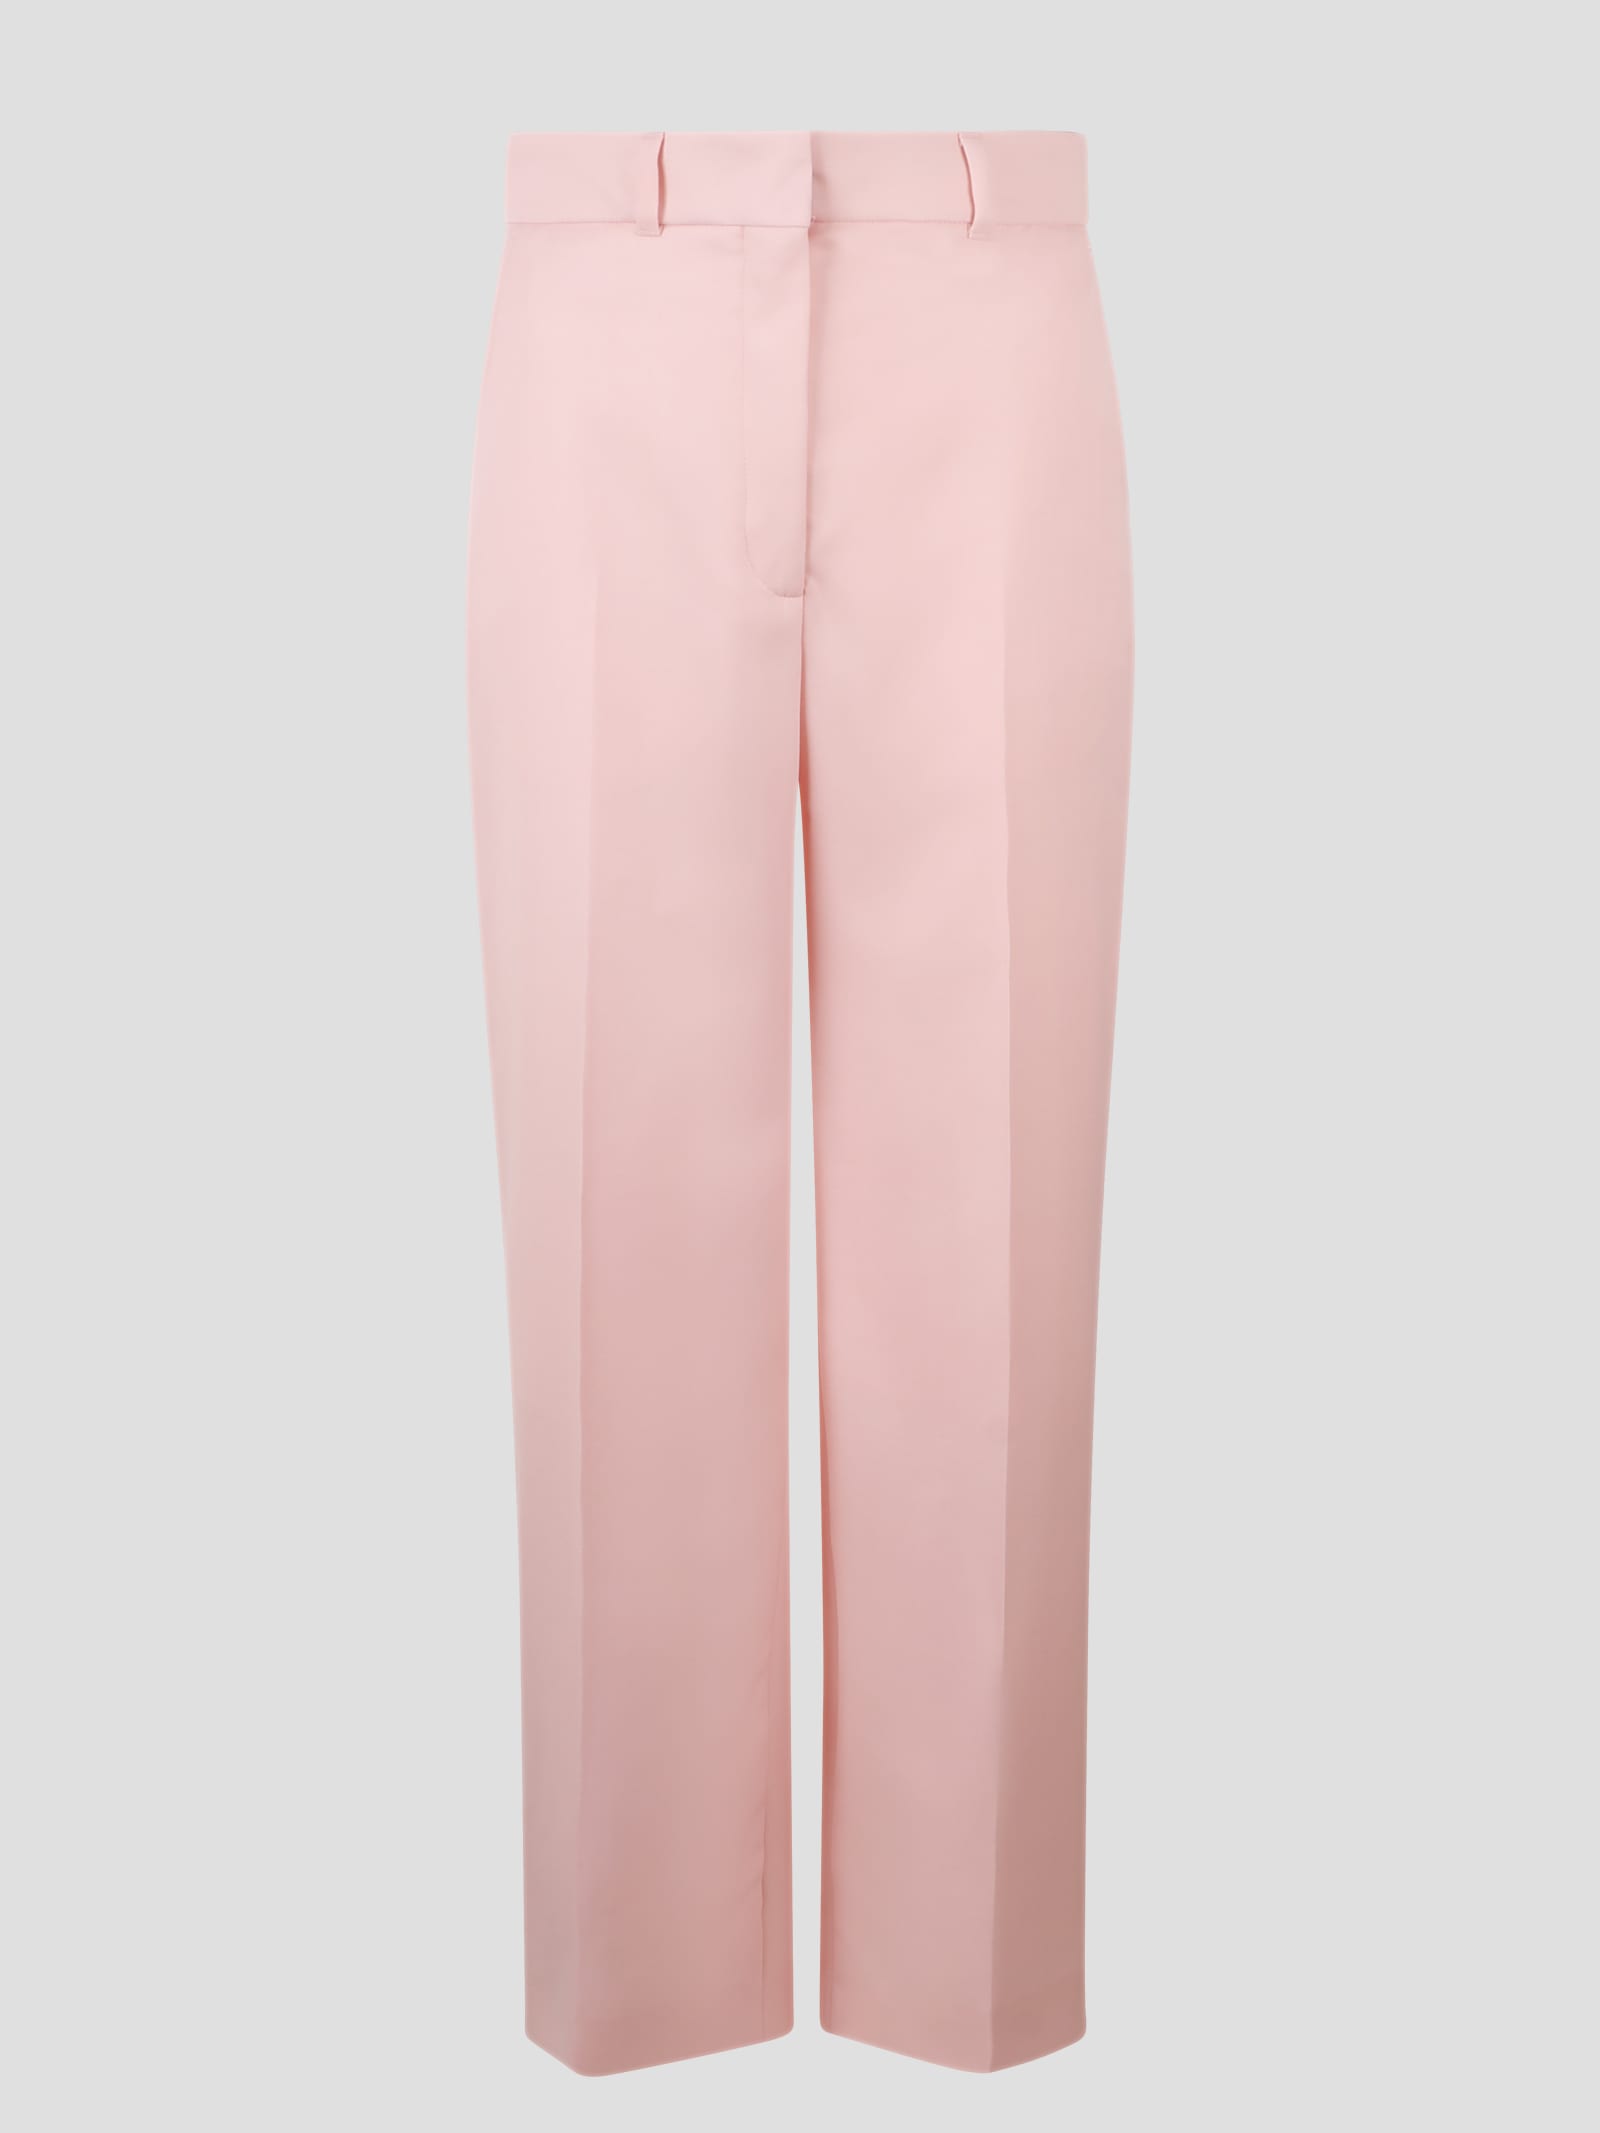 Casablanca Wool Flared Trousers